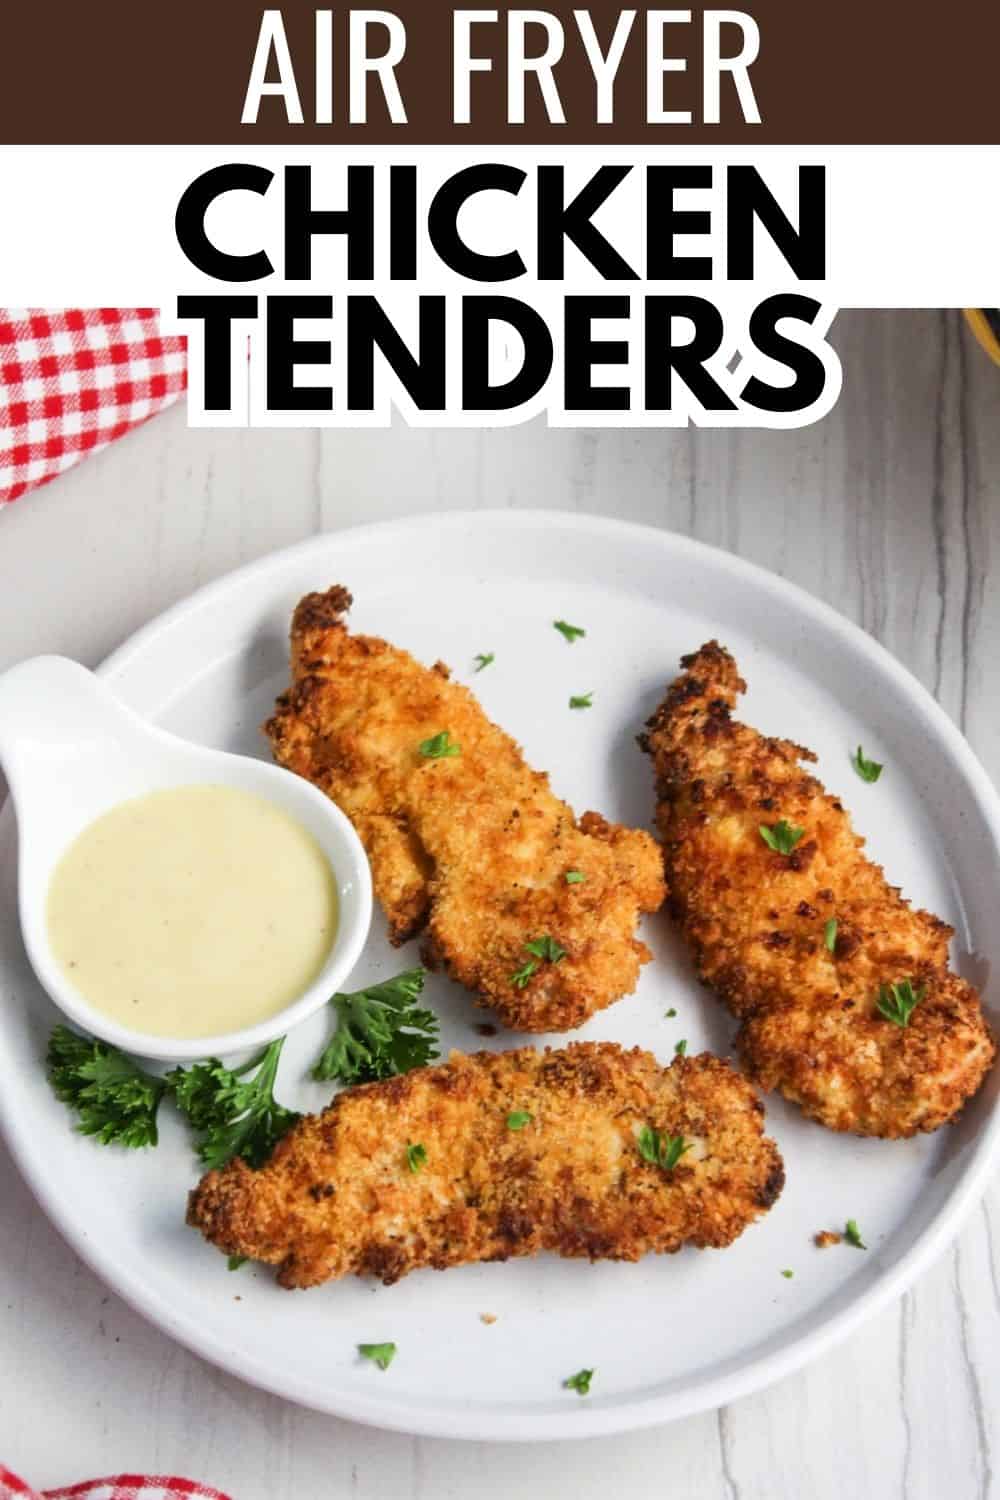 Air fryer chicken tenders on a plate with dipping sauce.